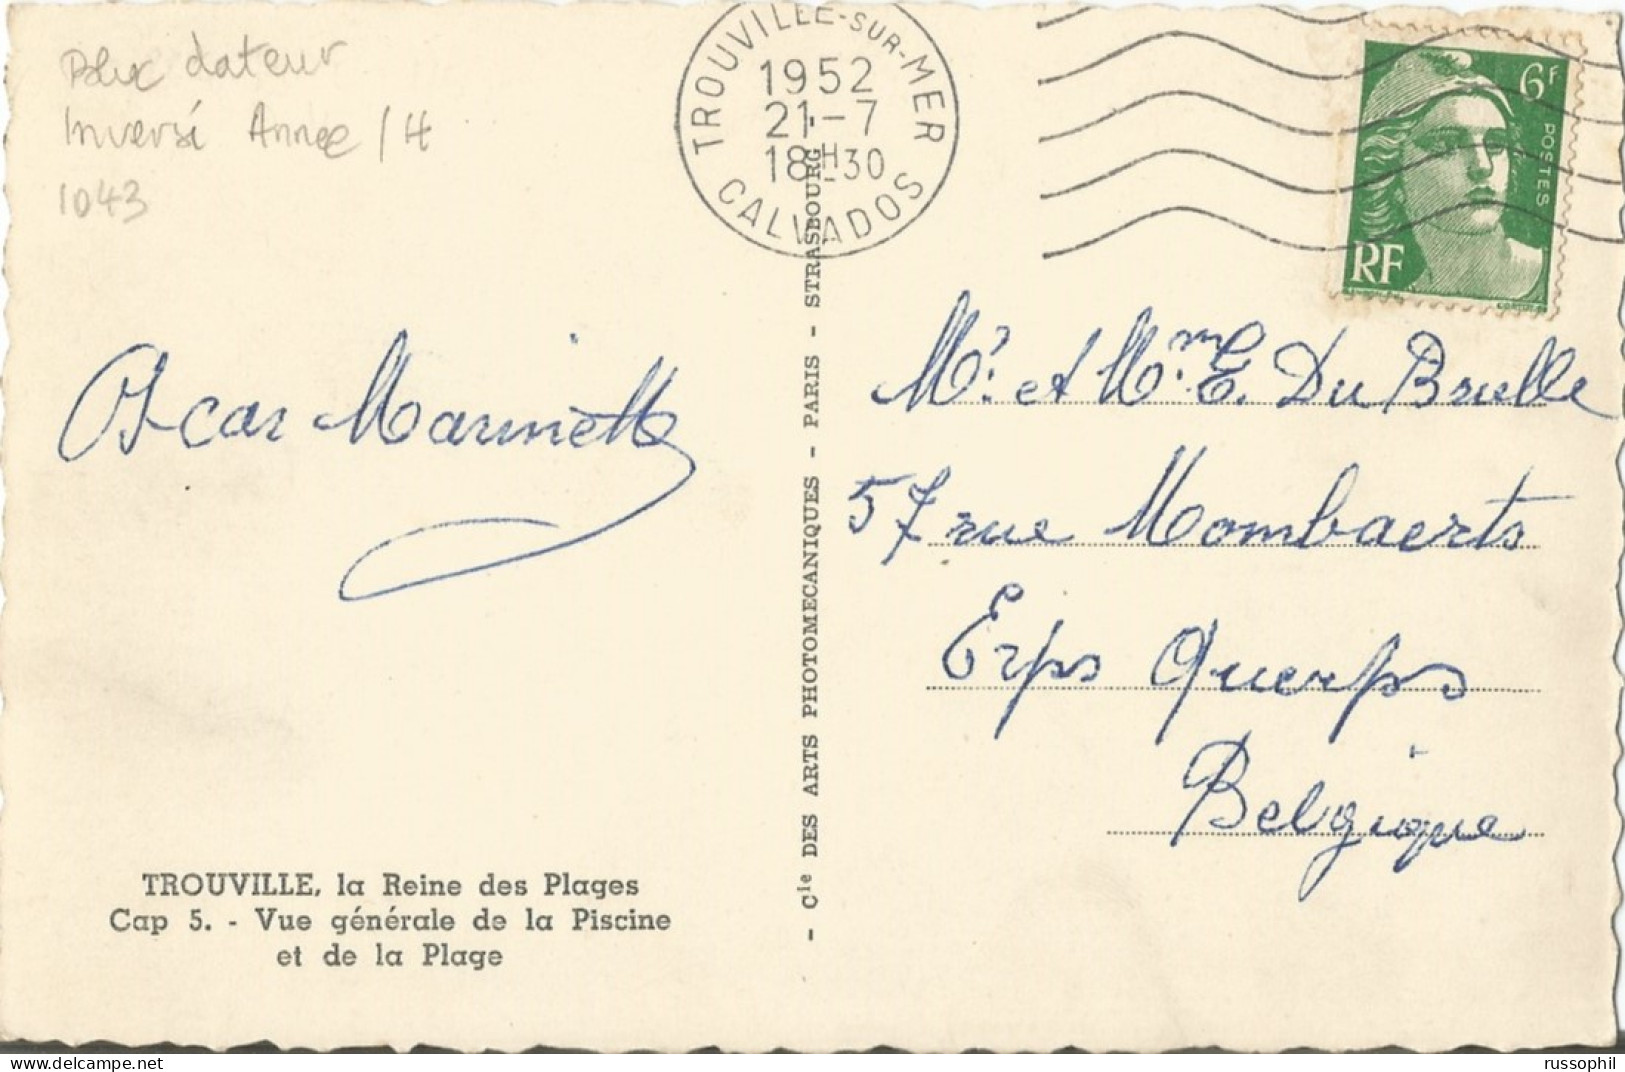 FRANCE -  VARIETY & CURIOSITY - 14 - WRONG ORDER YEAR /DAY- MONTH/ HOUR IN DATE BLOCK OF MUTE SECAP  "TROUVILLE"- 1952 - Lettres & Documents